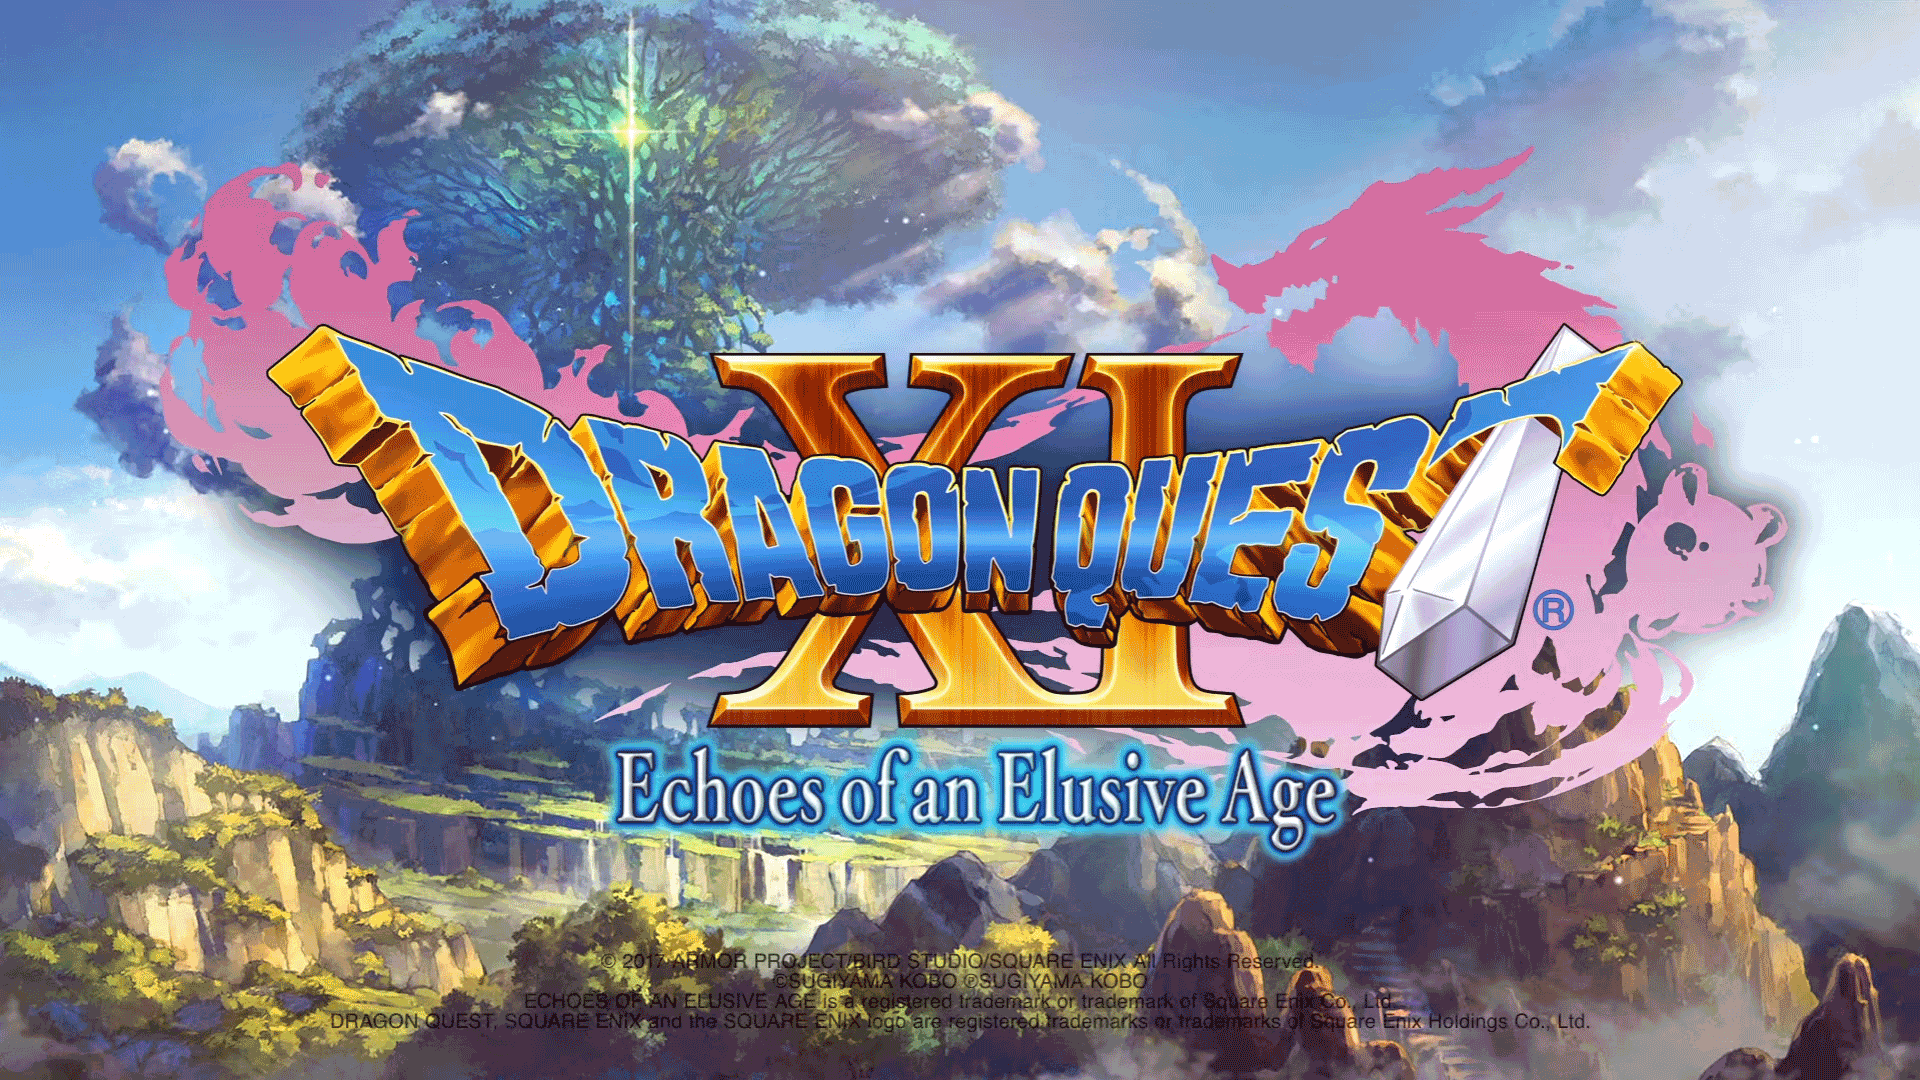 Dragon Quest XI: Echoes of an Elusive Age confirmed for western release in 2018